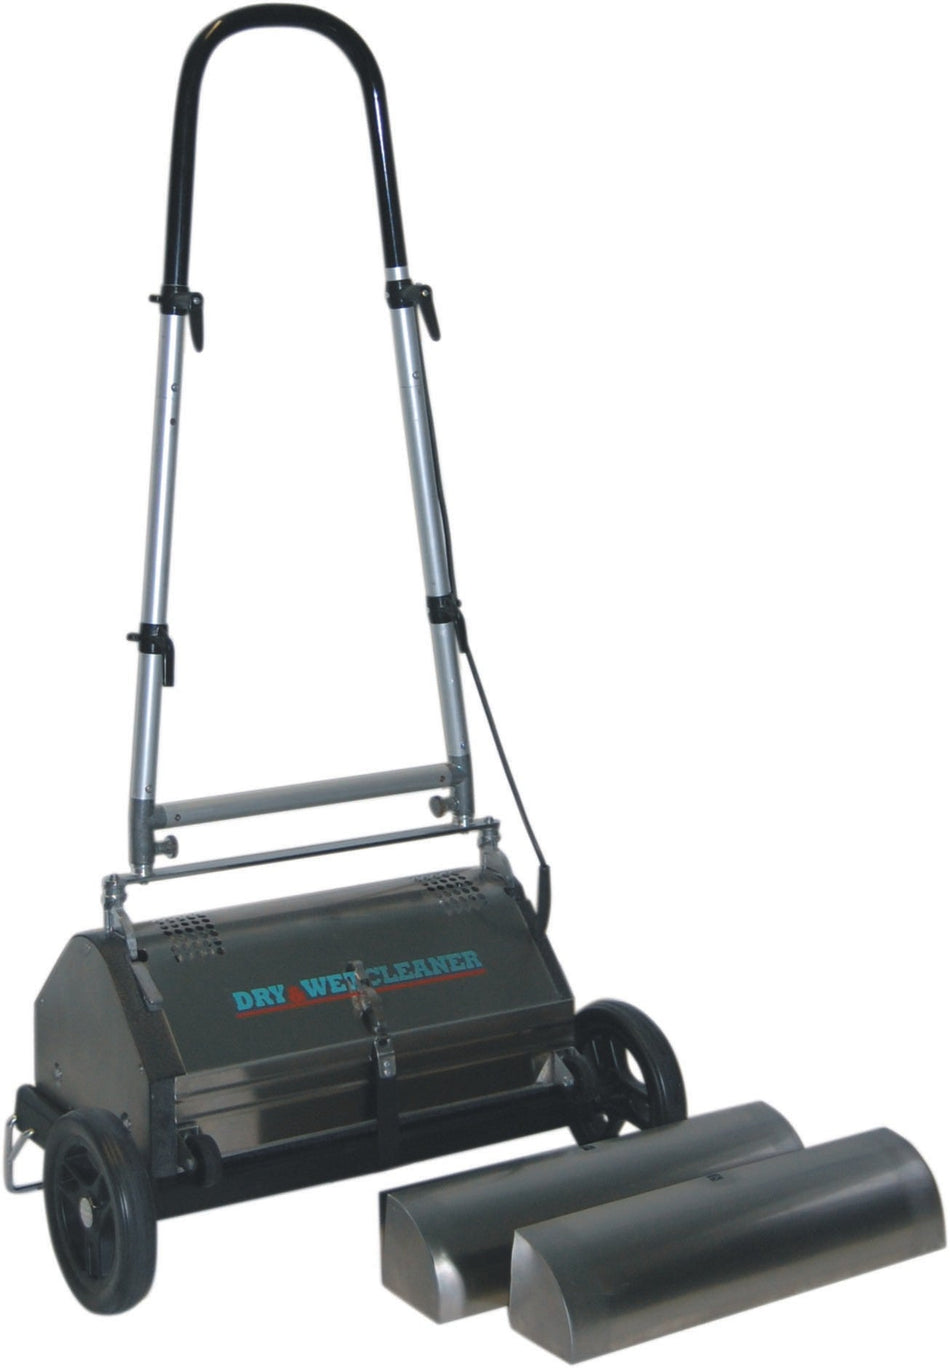 NIMBUS | Prochem Pro 35 Dry and Wet Floor & Carpet Cleaning Machine CA3802 | Carpet and upholstery cleaning equipment, Carpet Cleaning Machine, CRB Machines, Machines, Machines and Accessories, PRO 35, Prochem, Prochem Machines, Type_Equipment, | CRB Machines